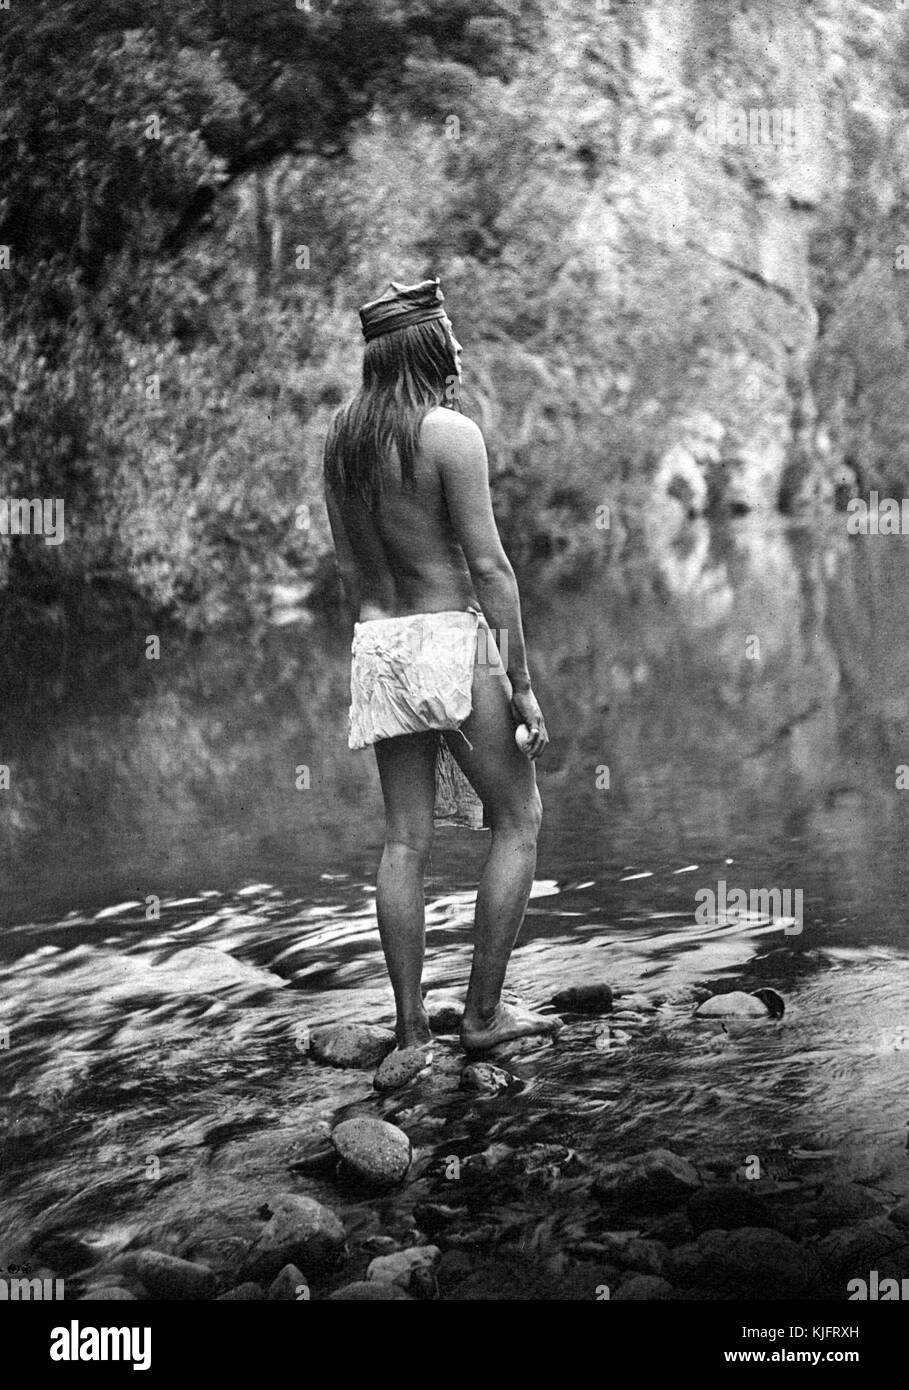 A photograph of a man belonging to the Apache Native American tribe, he is shown standing on rocks with water flowing around him, the man is only wearing a breechcloth and headband, trees and a high cliff face can be seen in the background, 1906. From the New York Public Library. Stock Photo